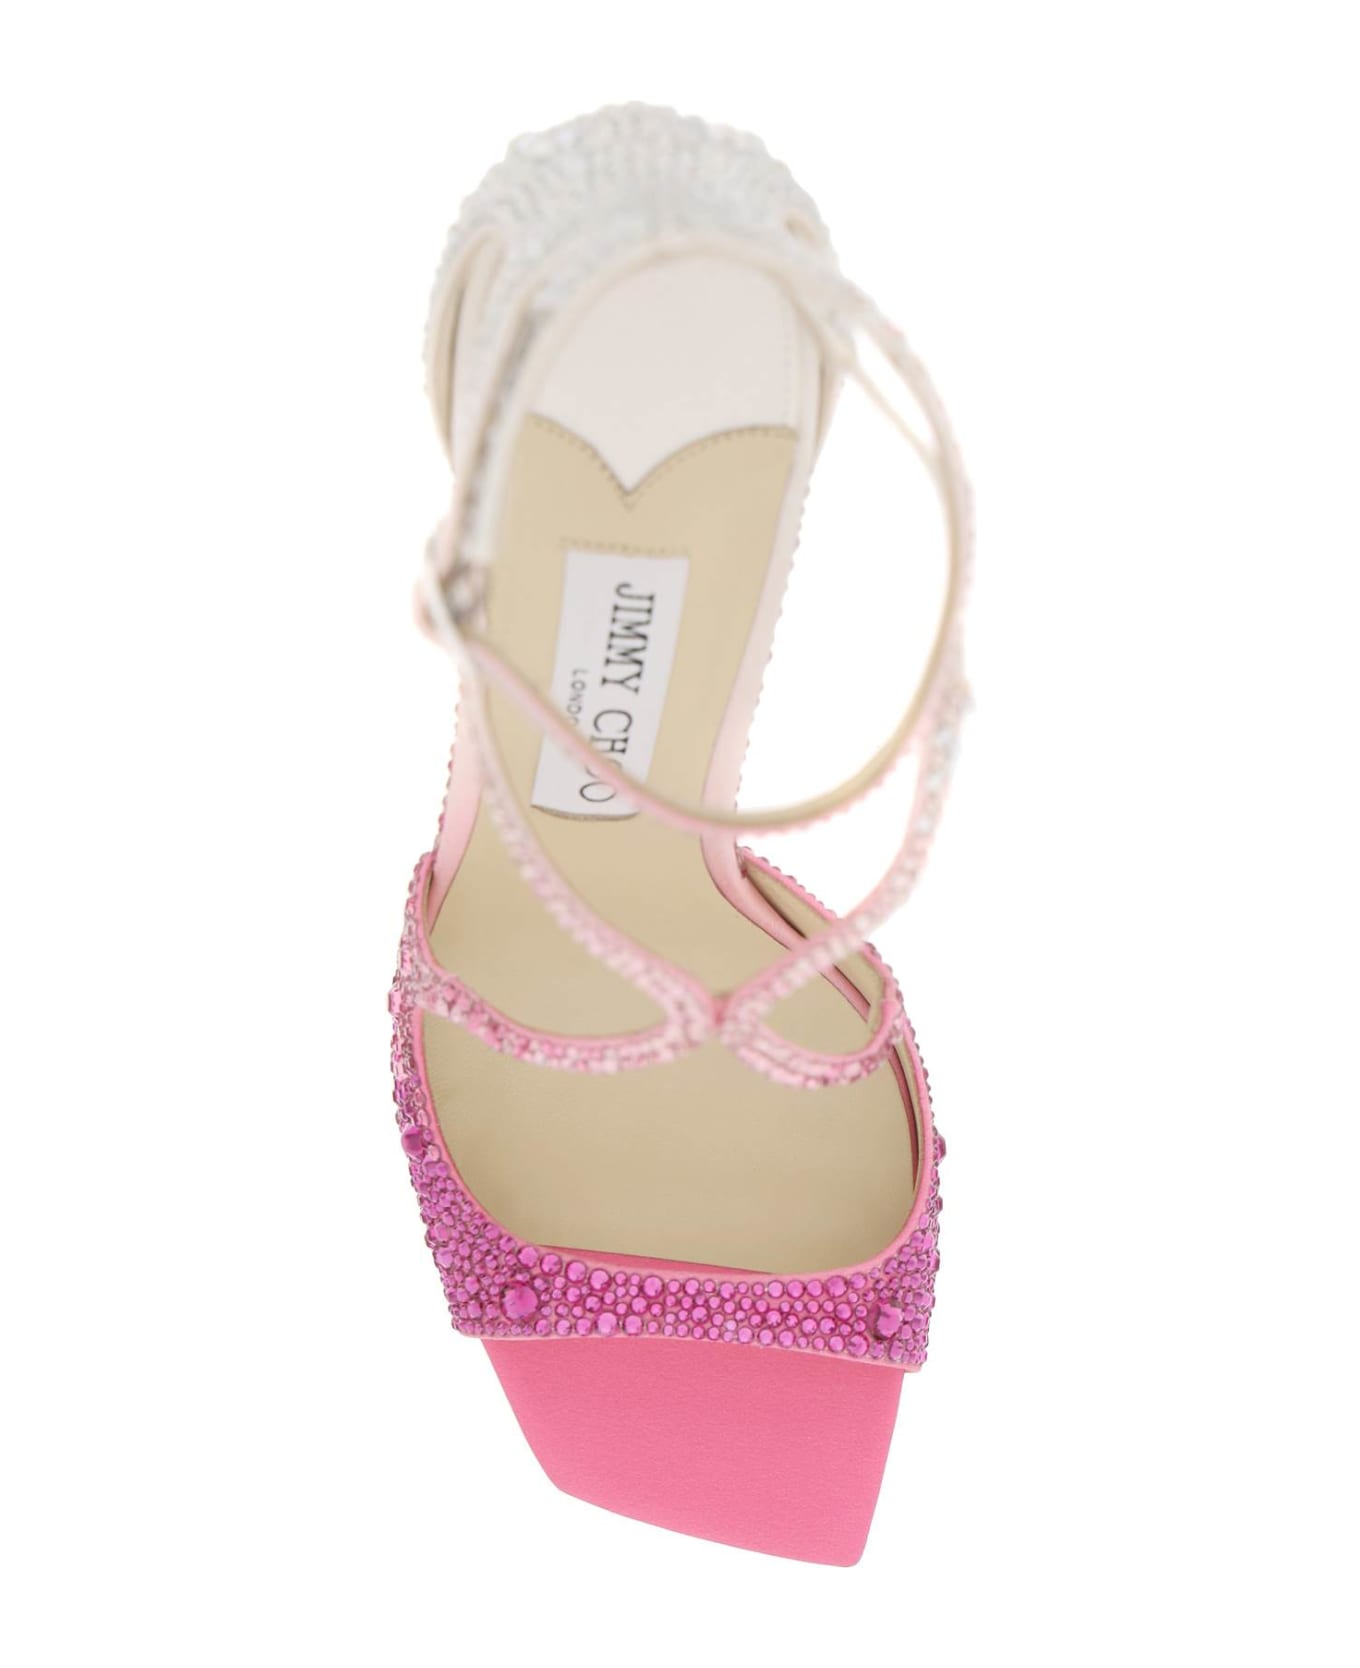 Jimmy Choo Azia 95 Pumps With Crystals - CANDY PINK CRYSTAL (Fuchsia)